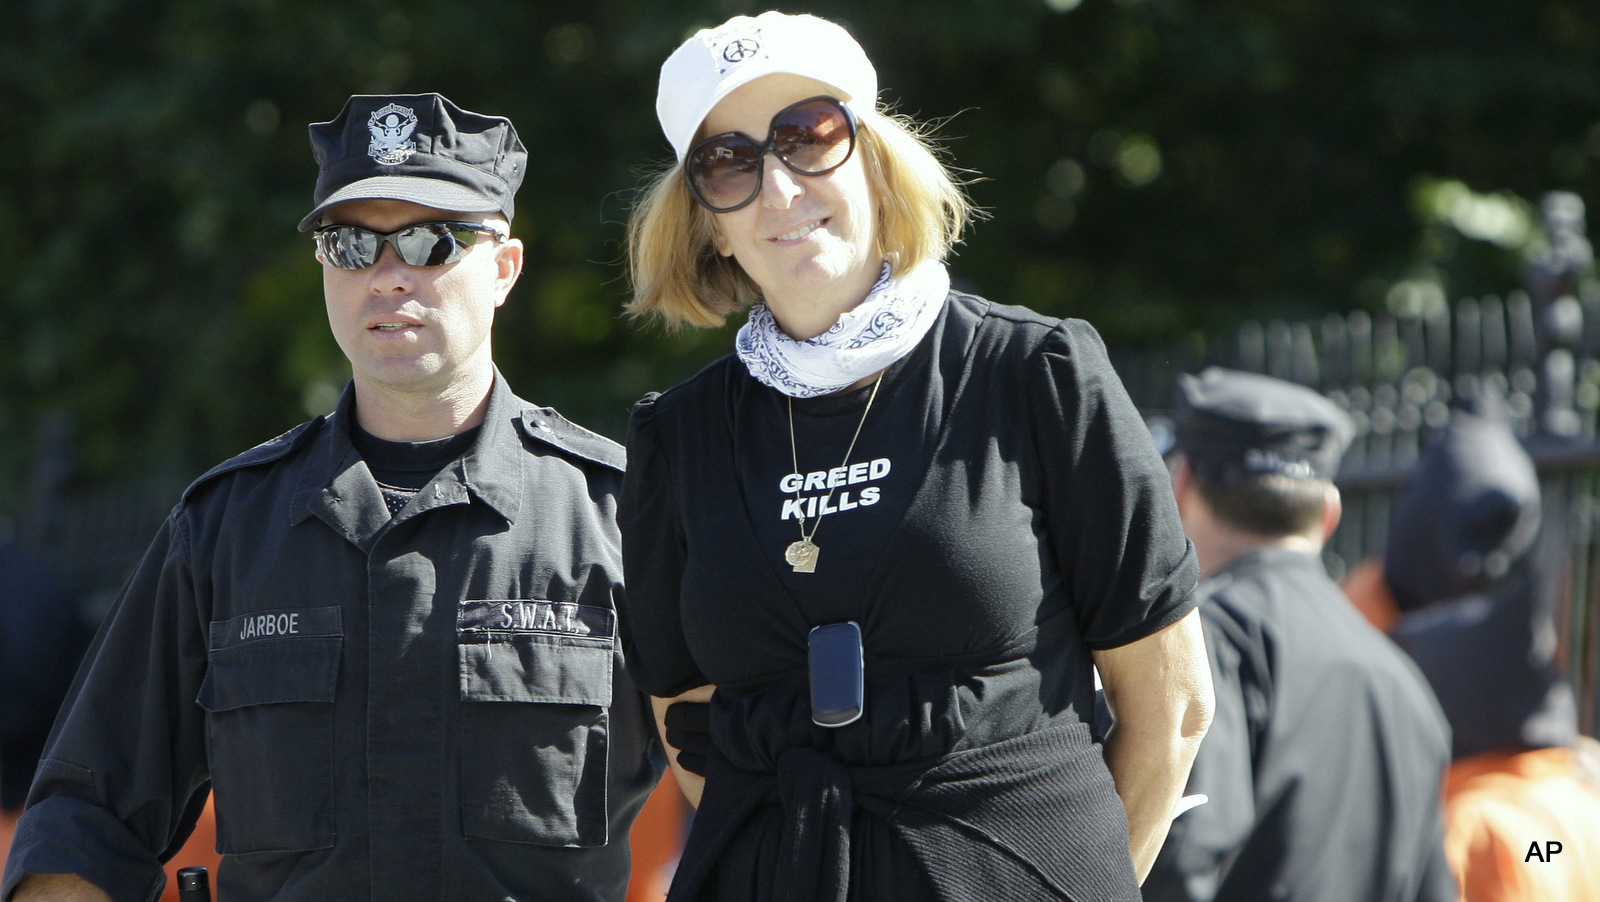 Cindy Sheehan is taken into custody by a United States Park Police officer during a demonstration in front of the White House in Washington, Monday, Oct. 5, 2009.